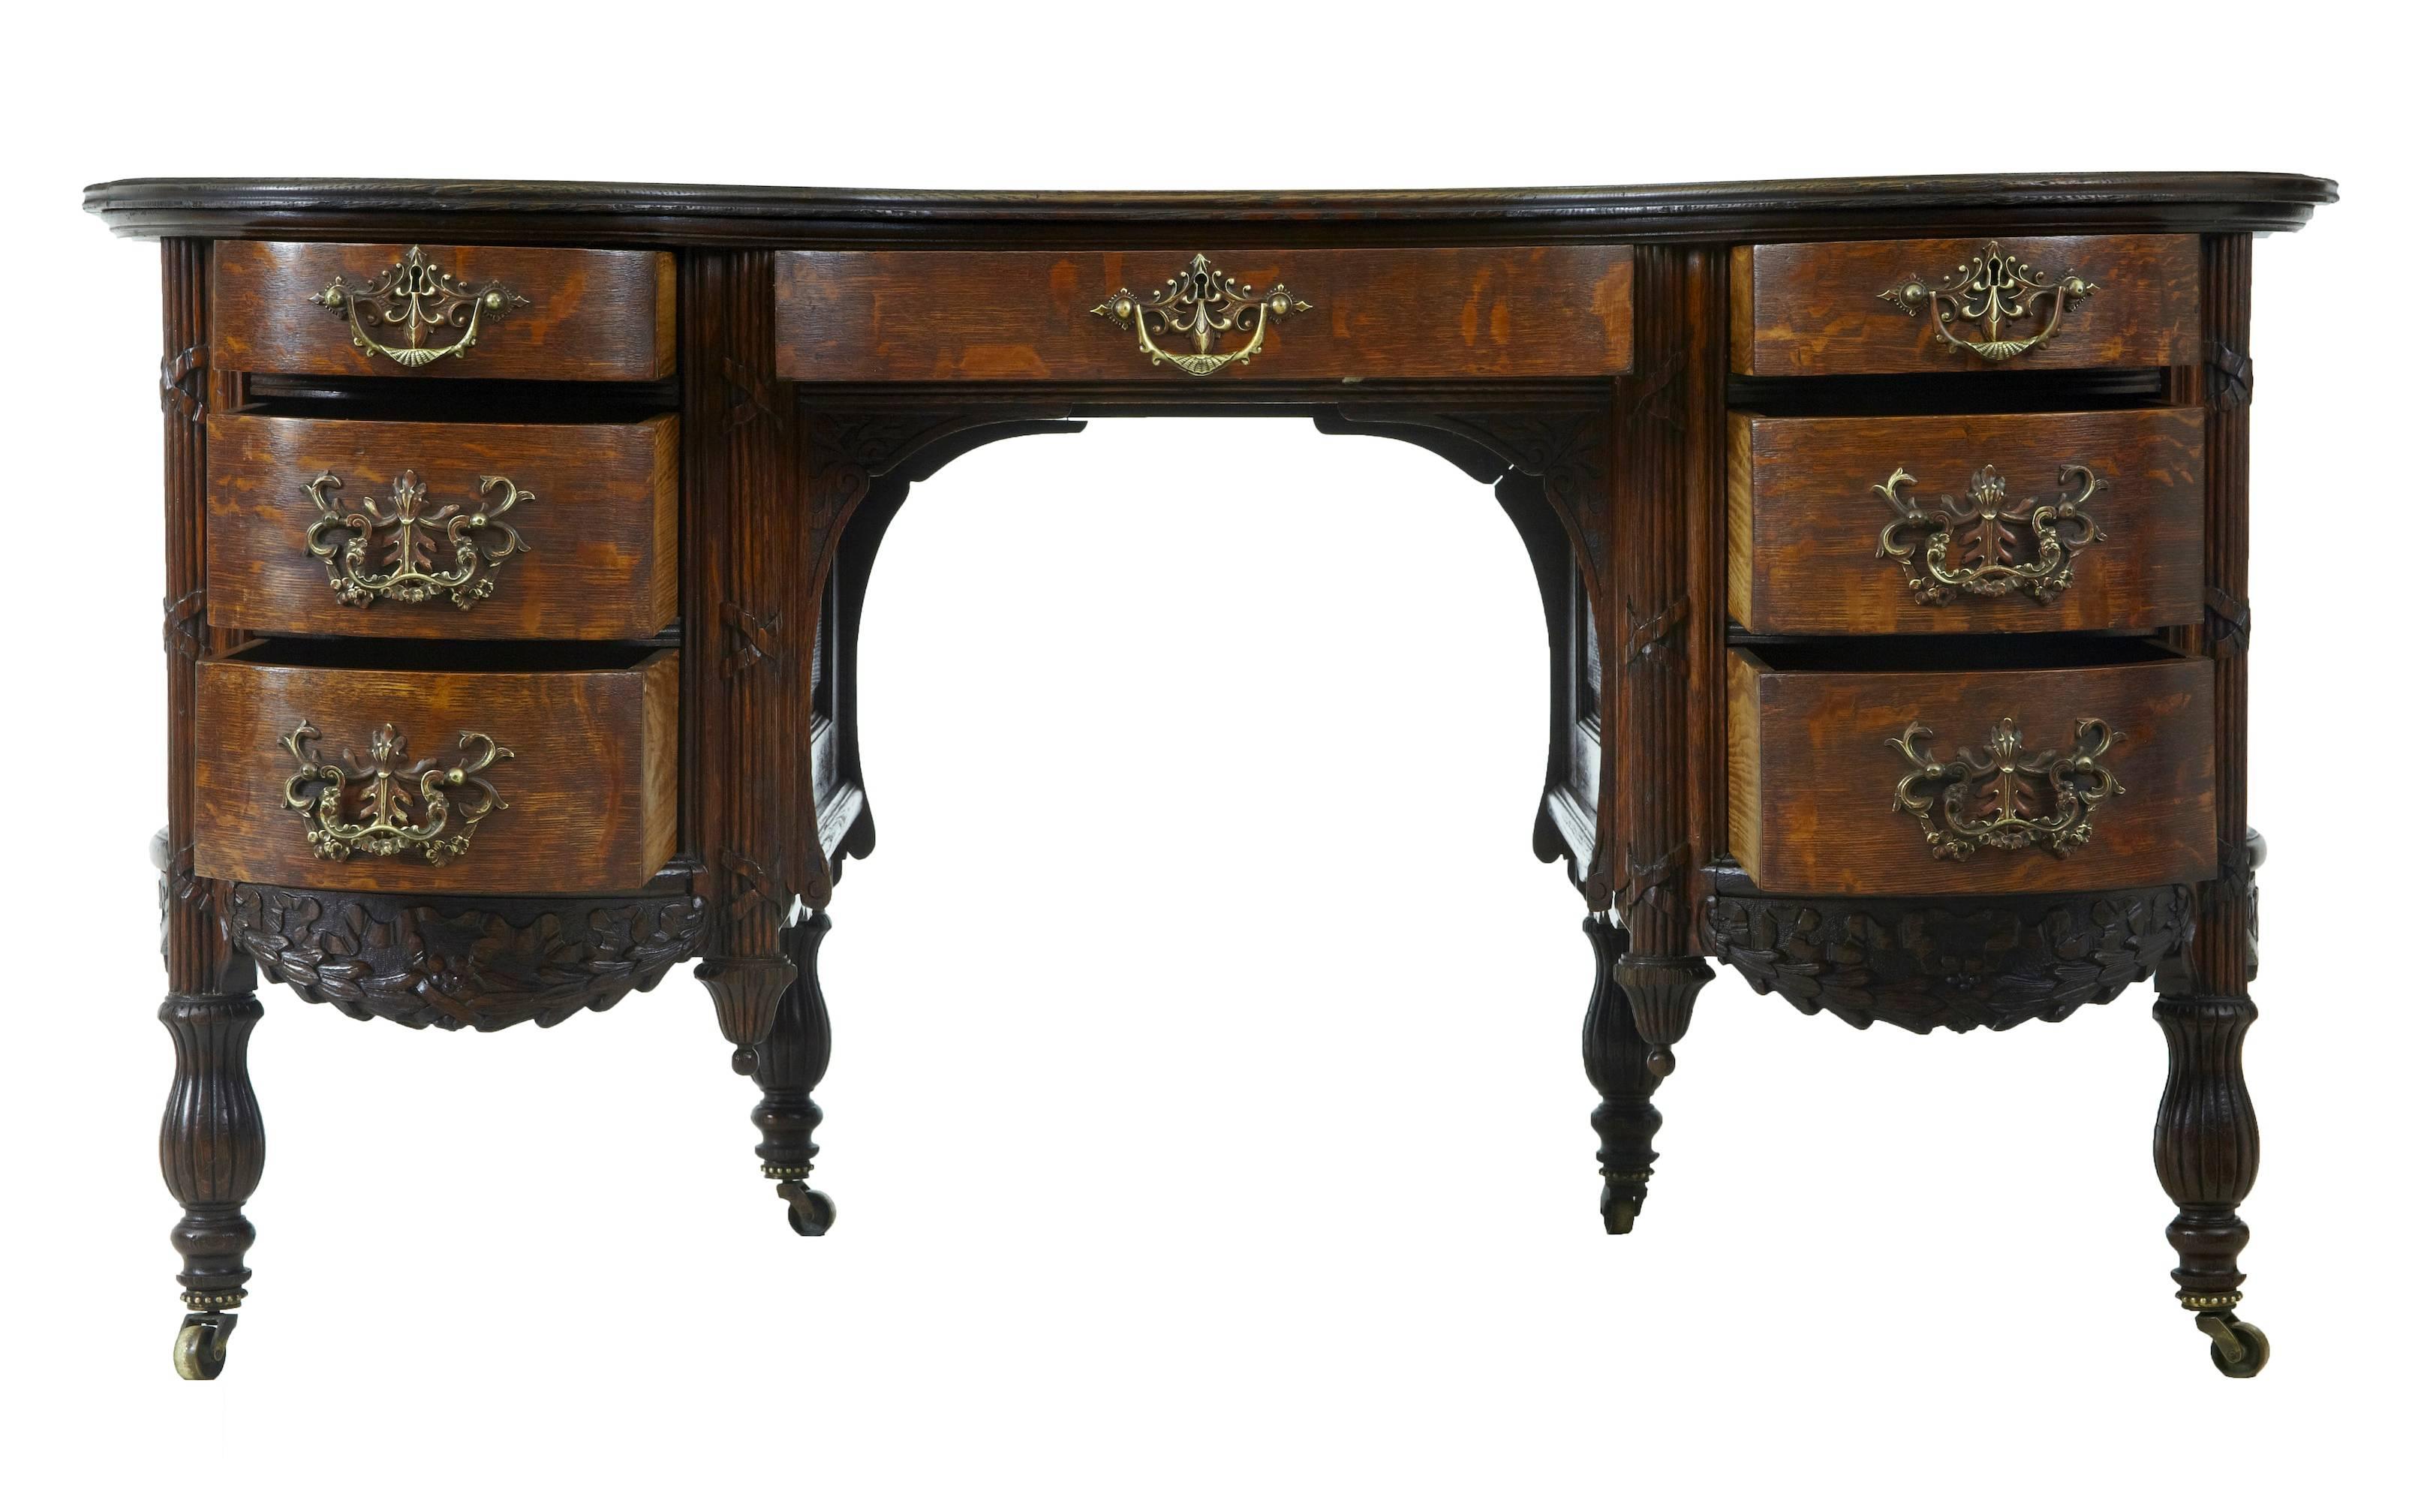 Carved oak kidney shaped desk, circa 1895.
Oak writing surface with burr, below which a central drawer over the knee hole, complimented either side by graduating drawers with ornate brass handles.
Standing on four fluted legs with brass